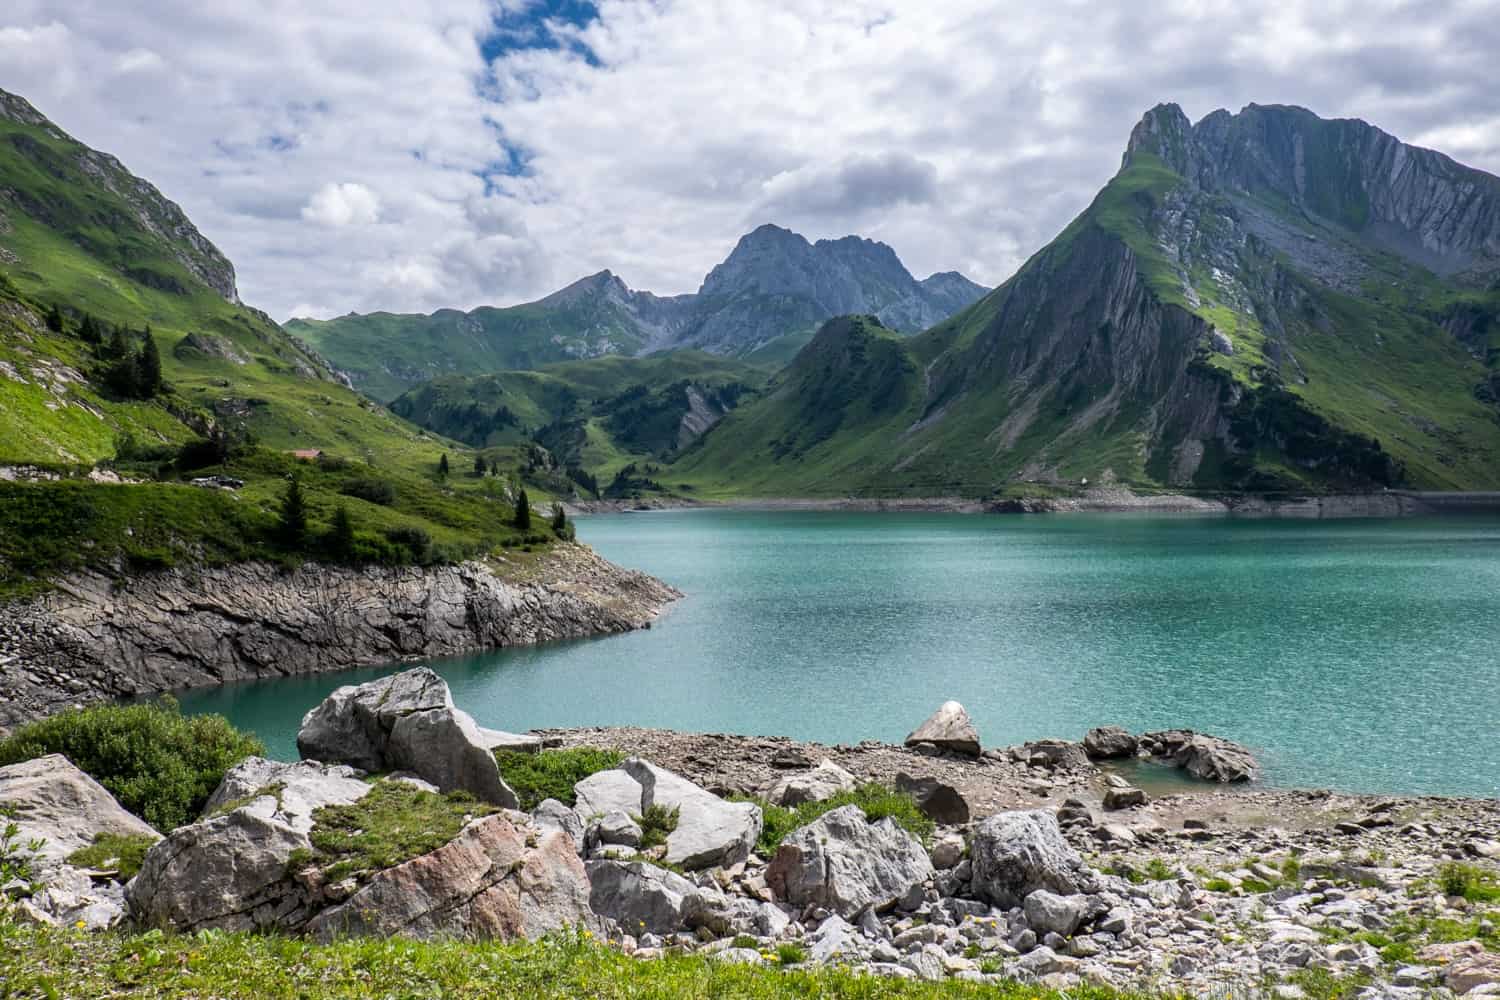 The nature and mountains surrounding Spullersee Lake in Lech, Vorarlberg, Austria